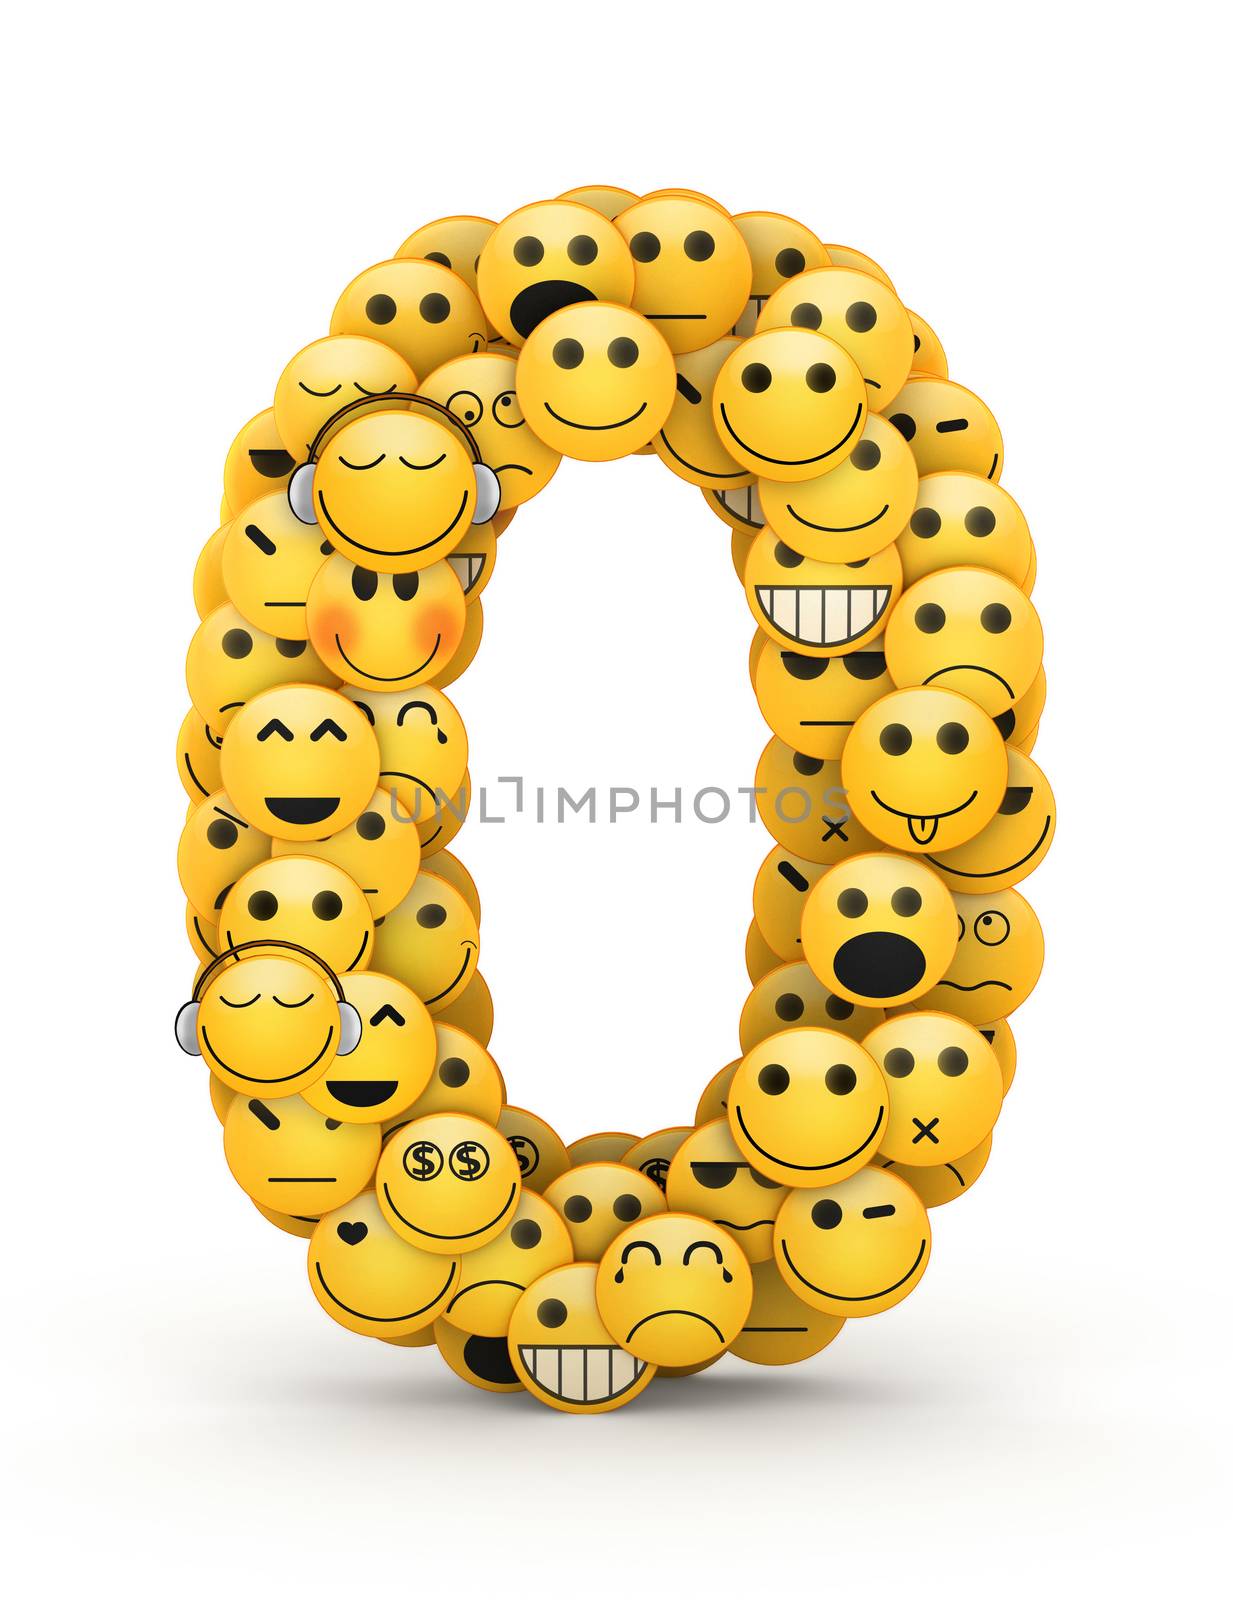 Number 0  compiled from Emoticons smiles with different emotions